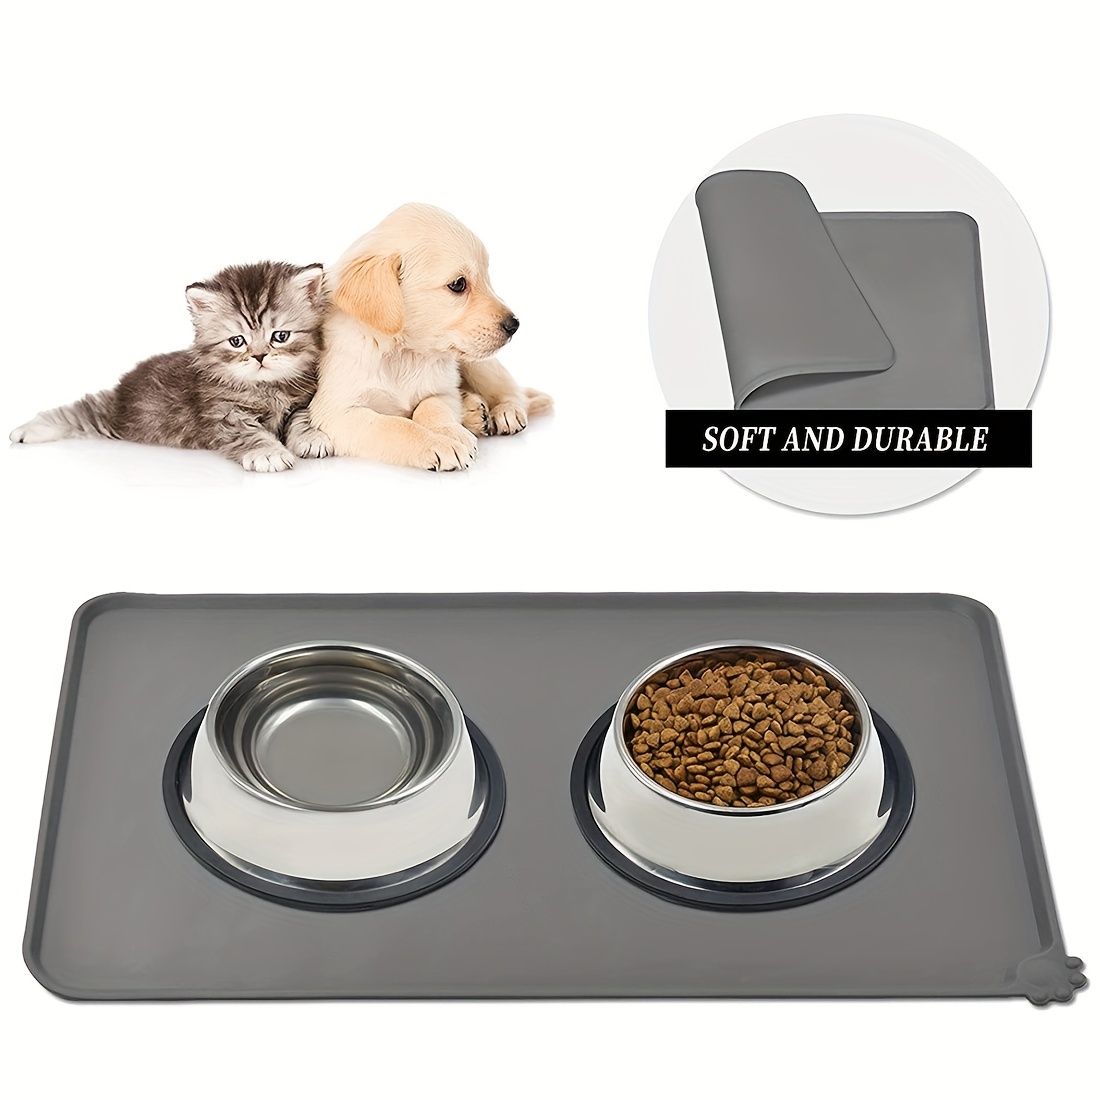 Dog Cat Pet Food Mat Dog Feeding Mat for Food and Water Silicone